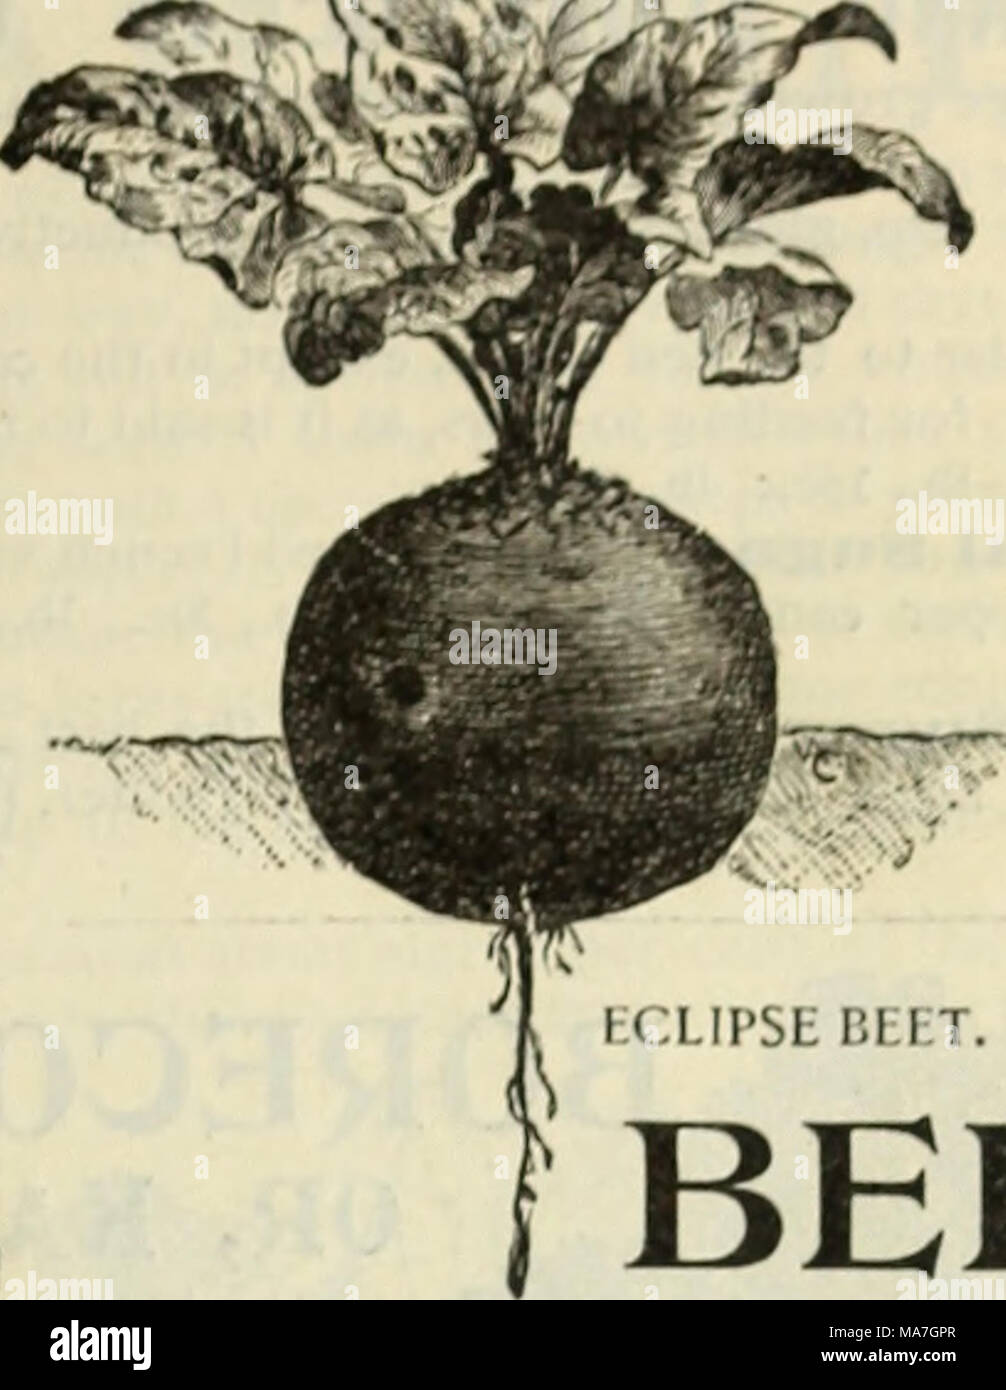 . E. H. Hunt : seedsman . ECLIPSE Hi ! T. DLWING'S BEET BEETS. Stock Photo